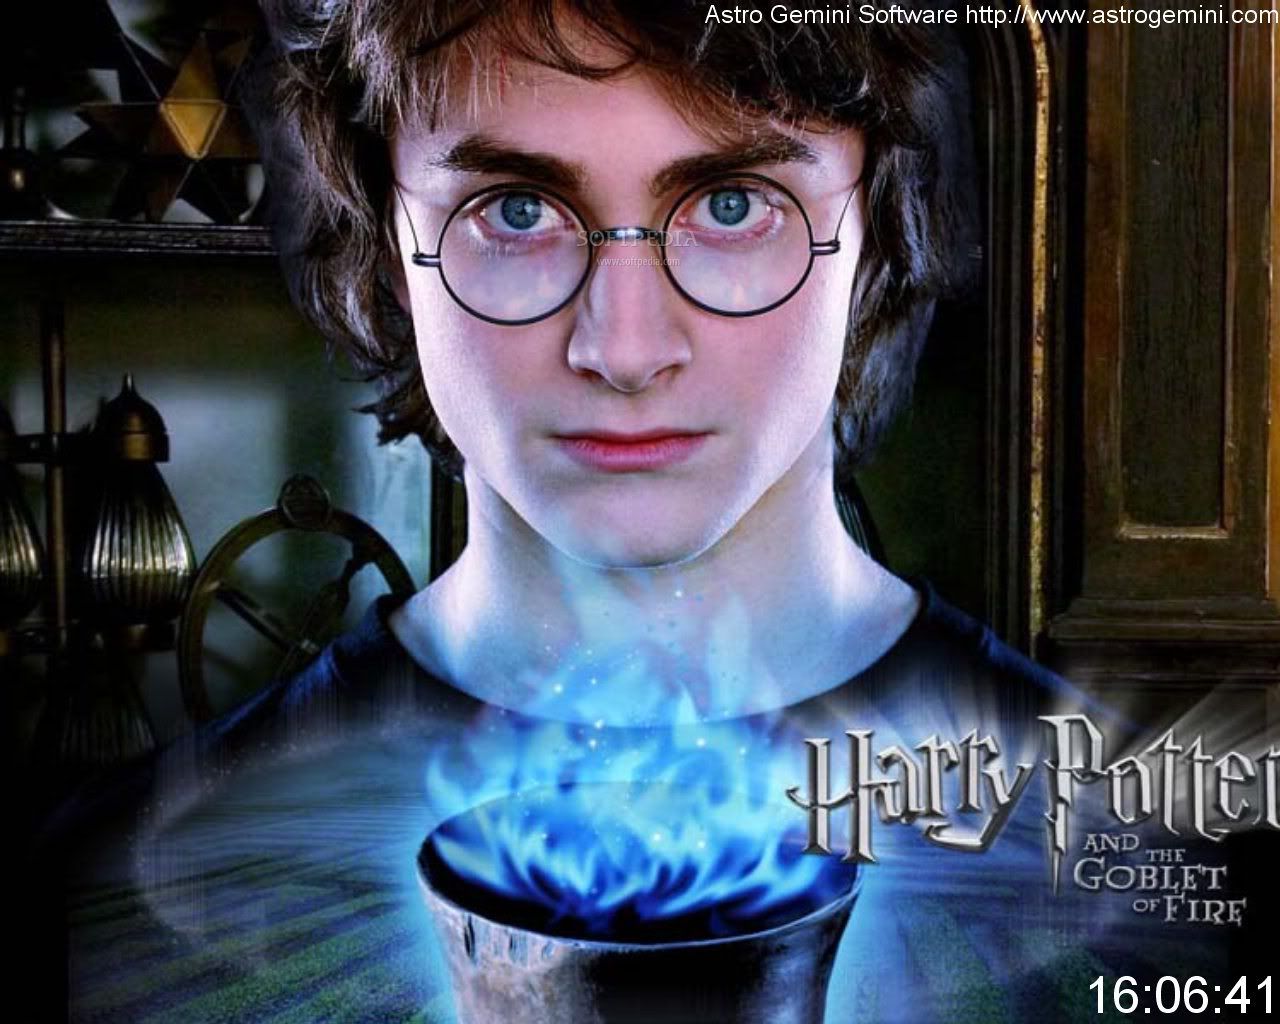 Free-Harry-Potter-Screensaver_11.jpg image by AREUENOUGH4ME